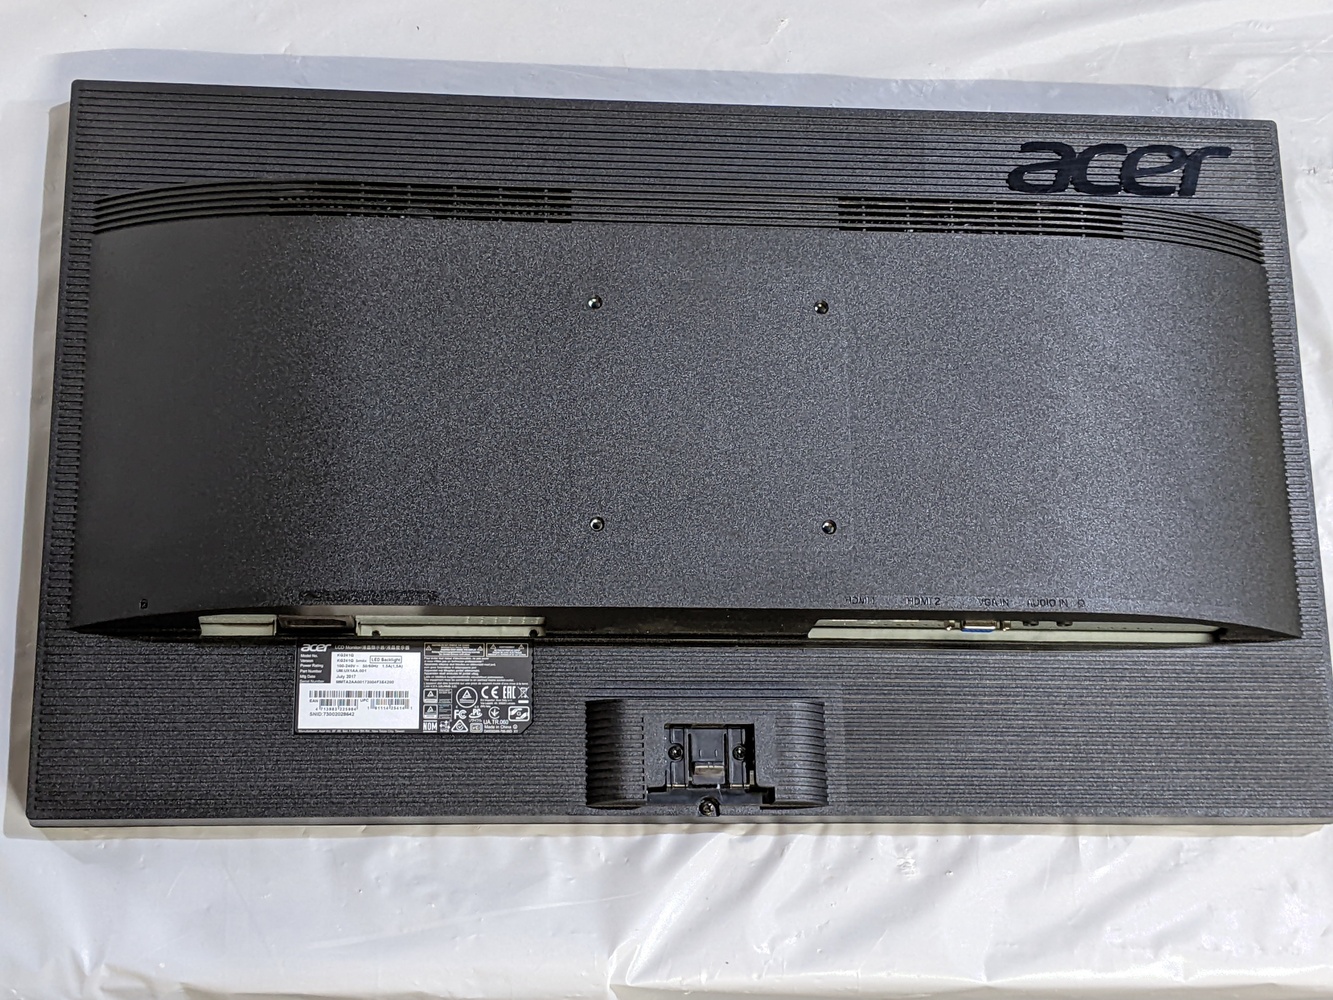 Acer KG241Q Sbiip 23.6